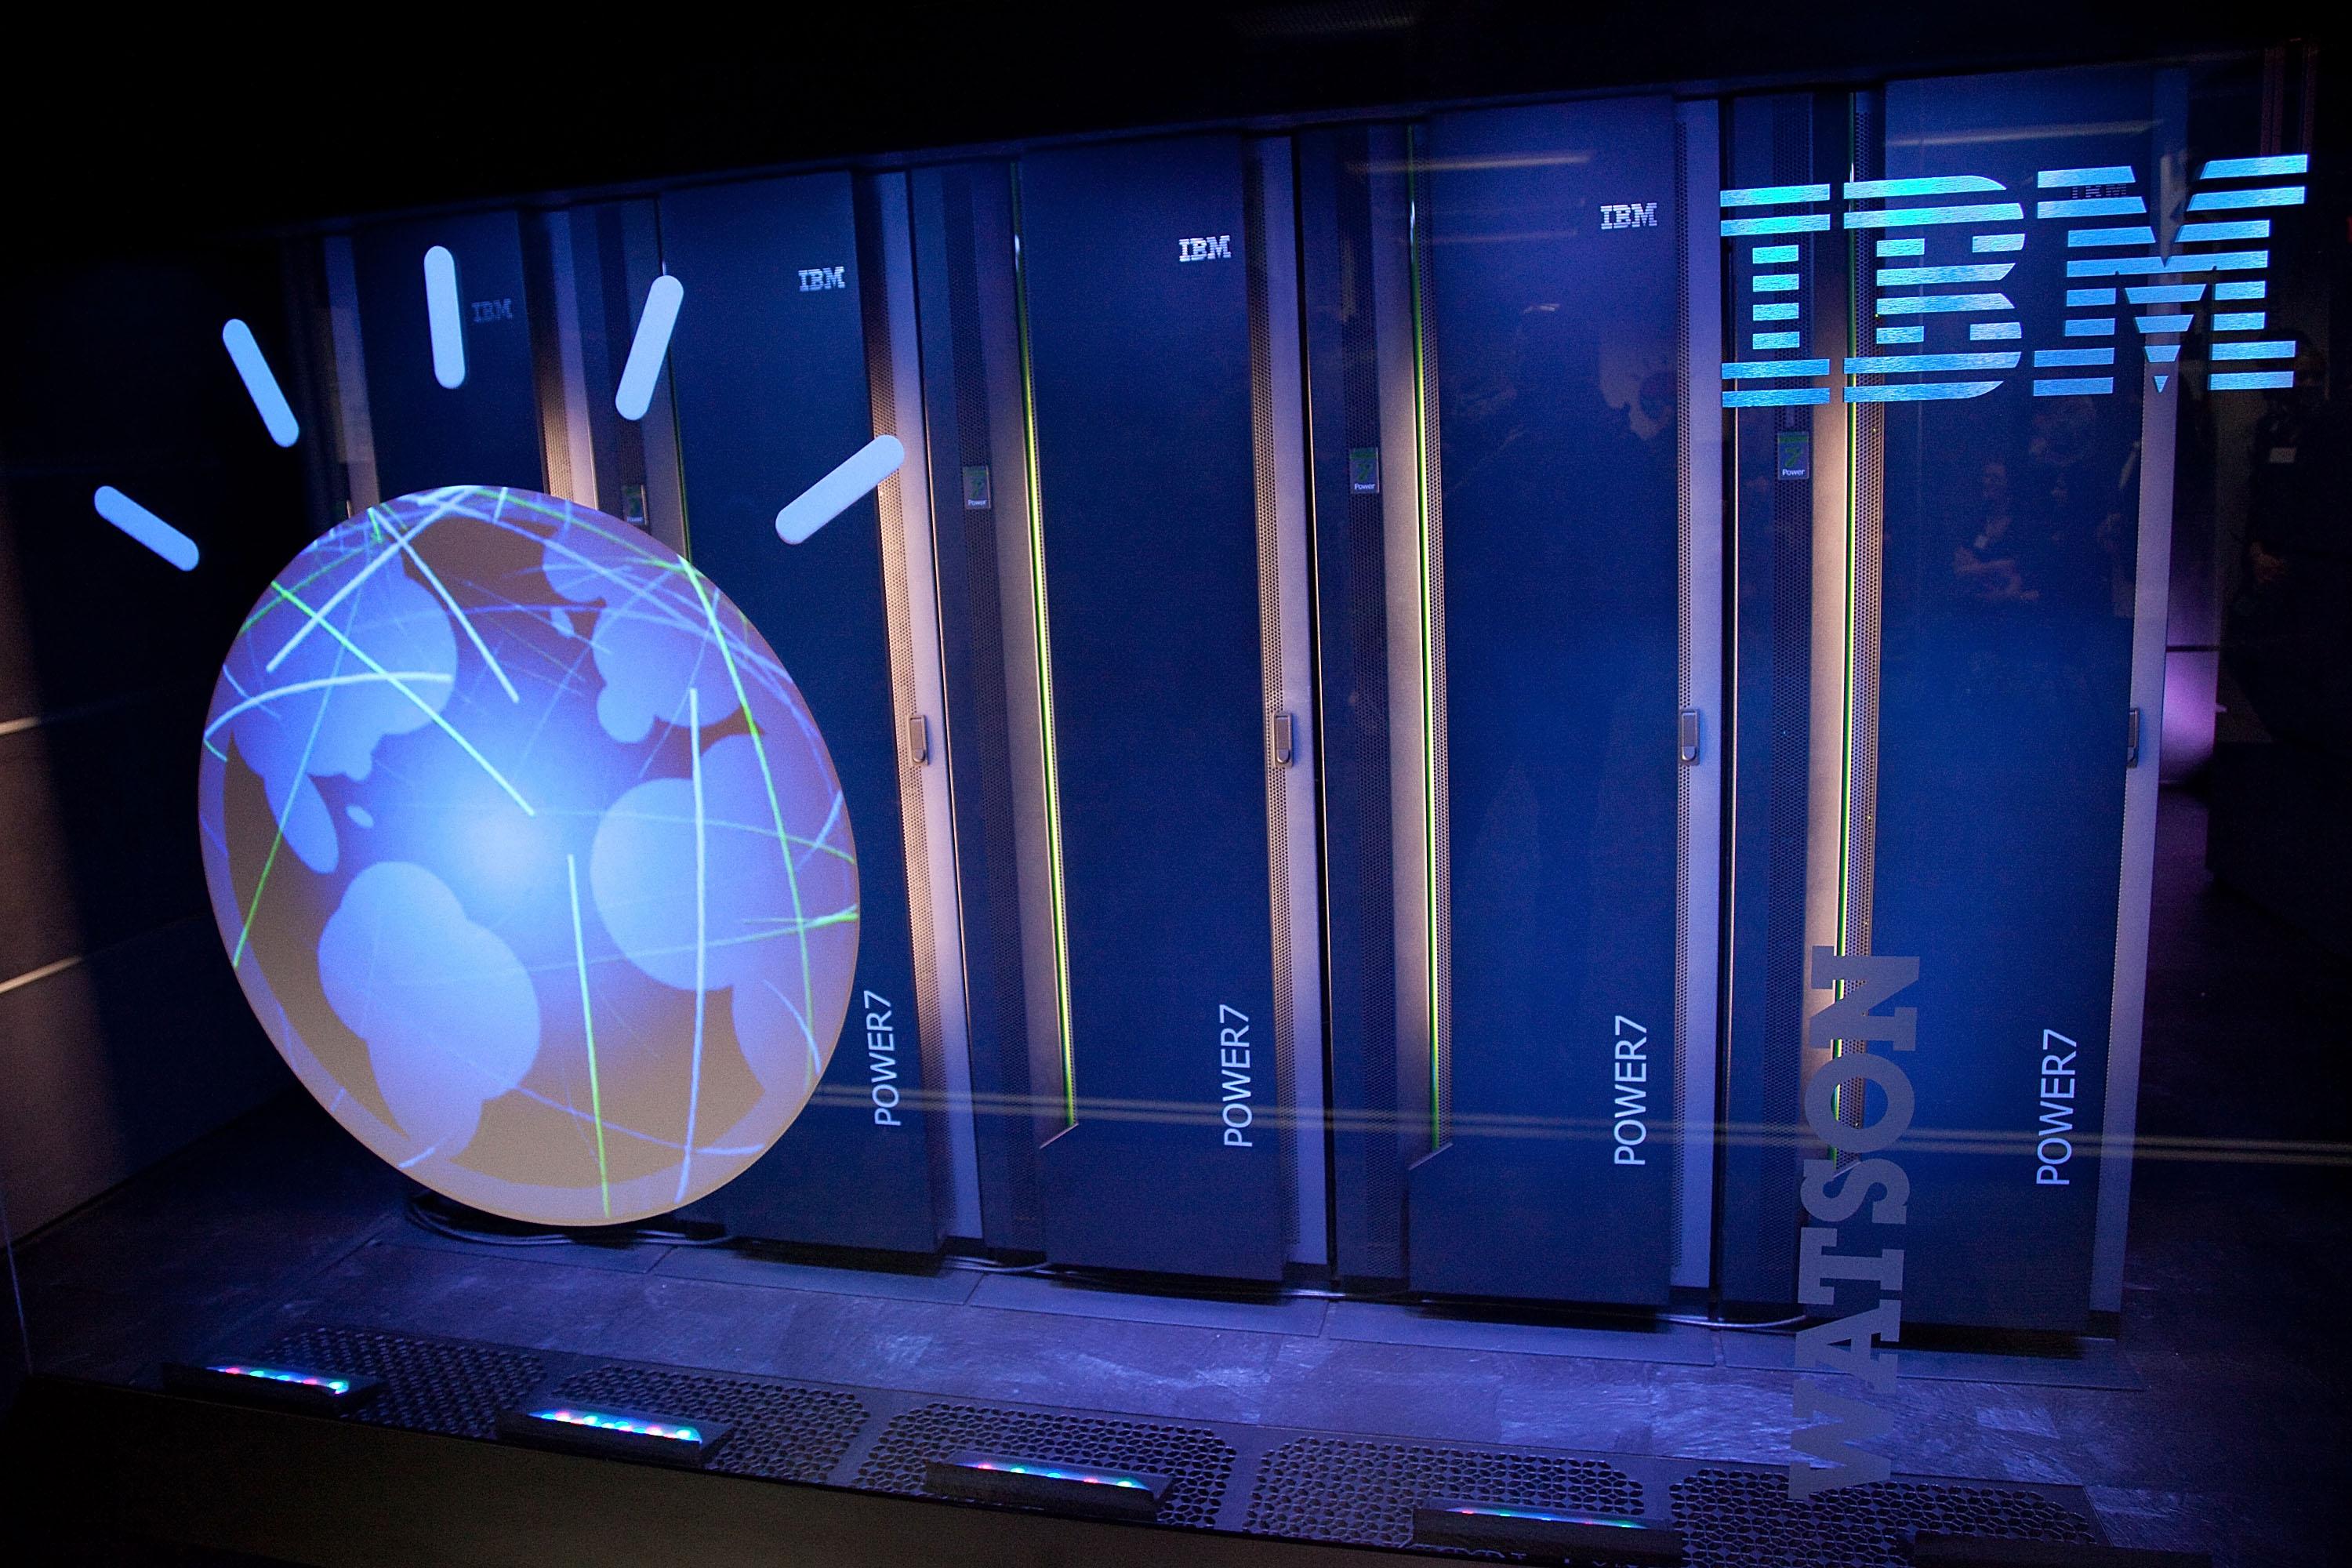 YORKTOWN HEIGHTS, NY - JANUARY 13:  A general view of IBM's 'Watson' computing system at a press conference to discuss the upcoming Man V. Machine "Jeopardy!" competition at the IBM T.J. Watson Research Center on January 13, 2011 in Yorktown Heights, New York.  (Photo by Ben Hider/Getty Images)